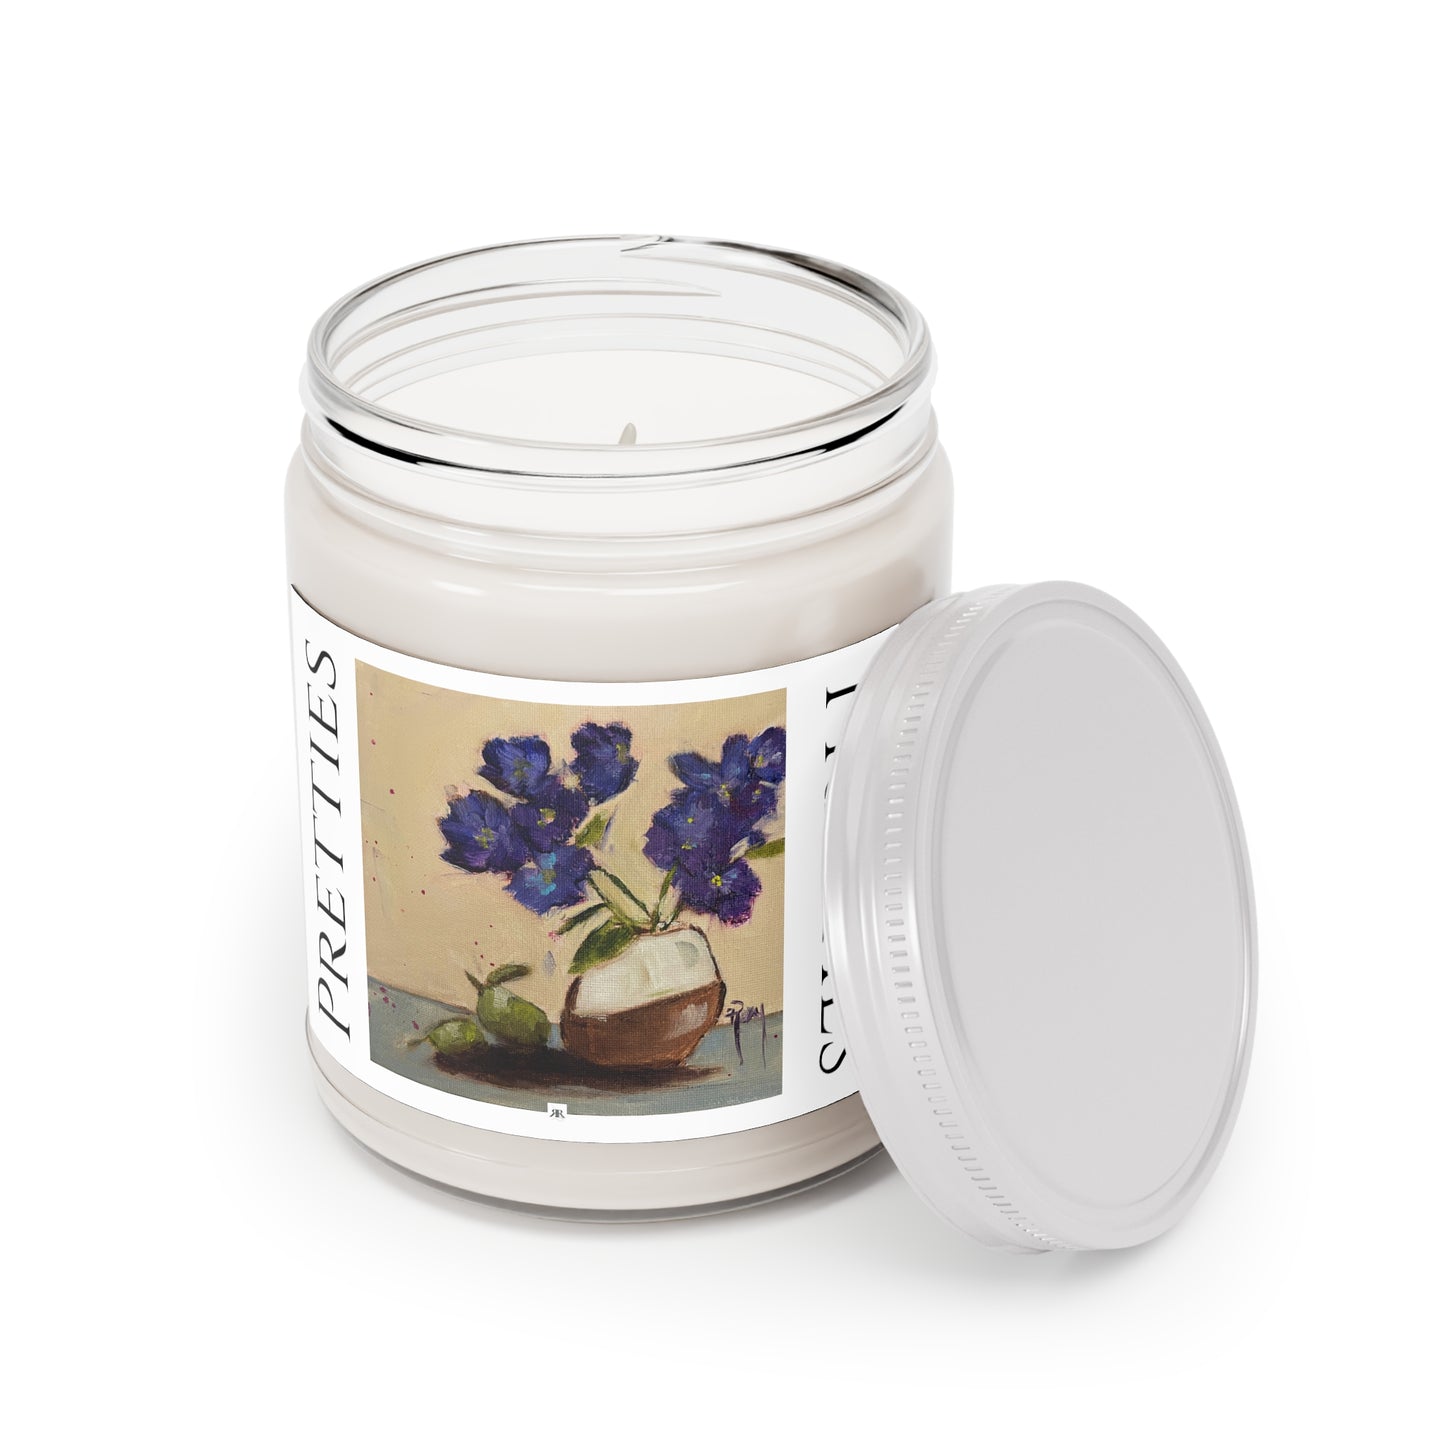 Pretties Hydrangeas and Pears Scented Candle 9oz